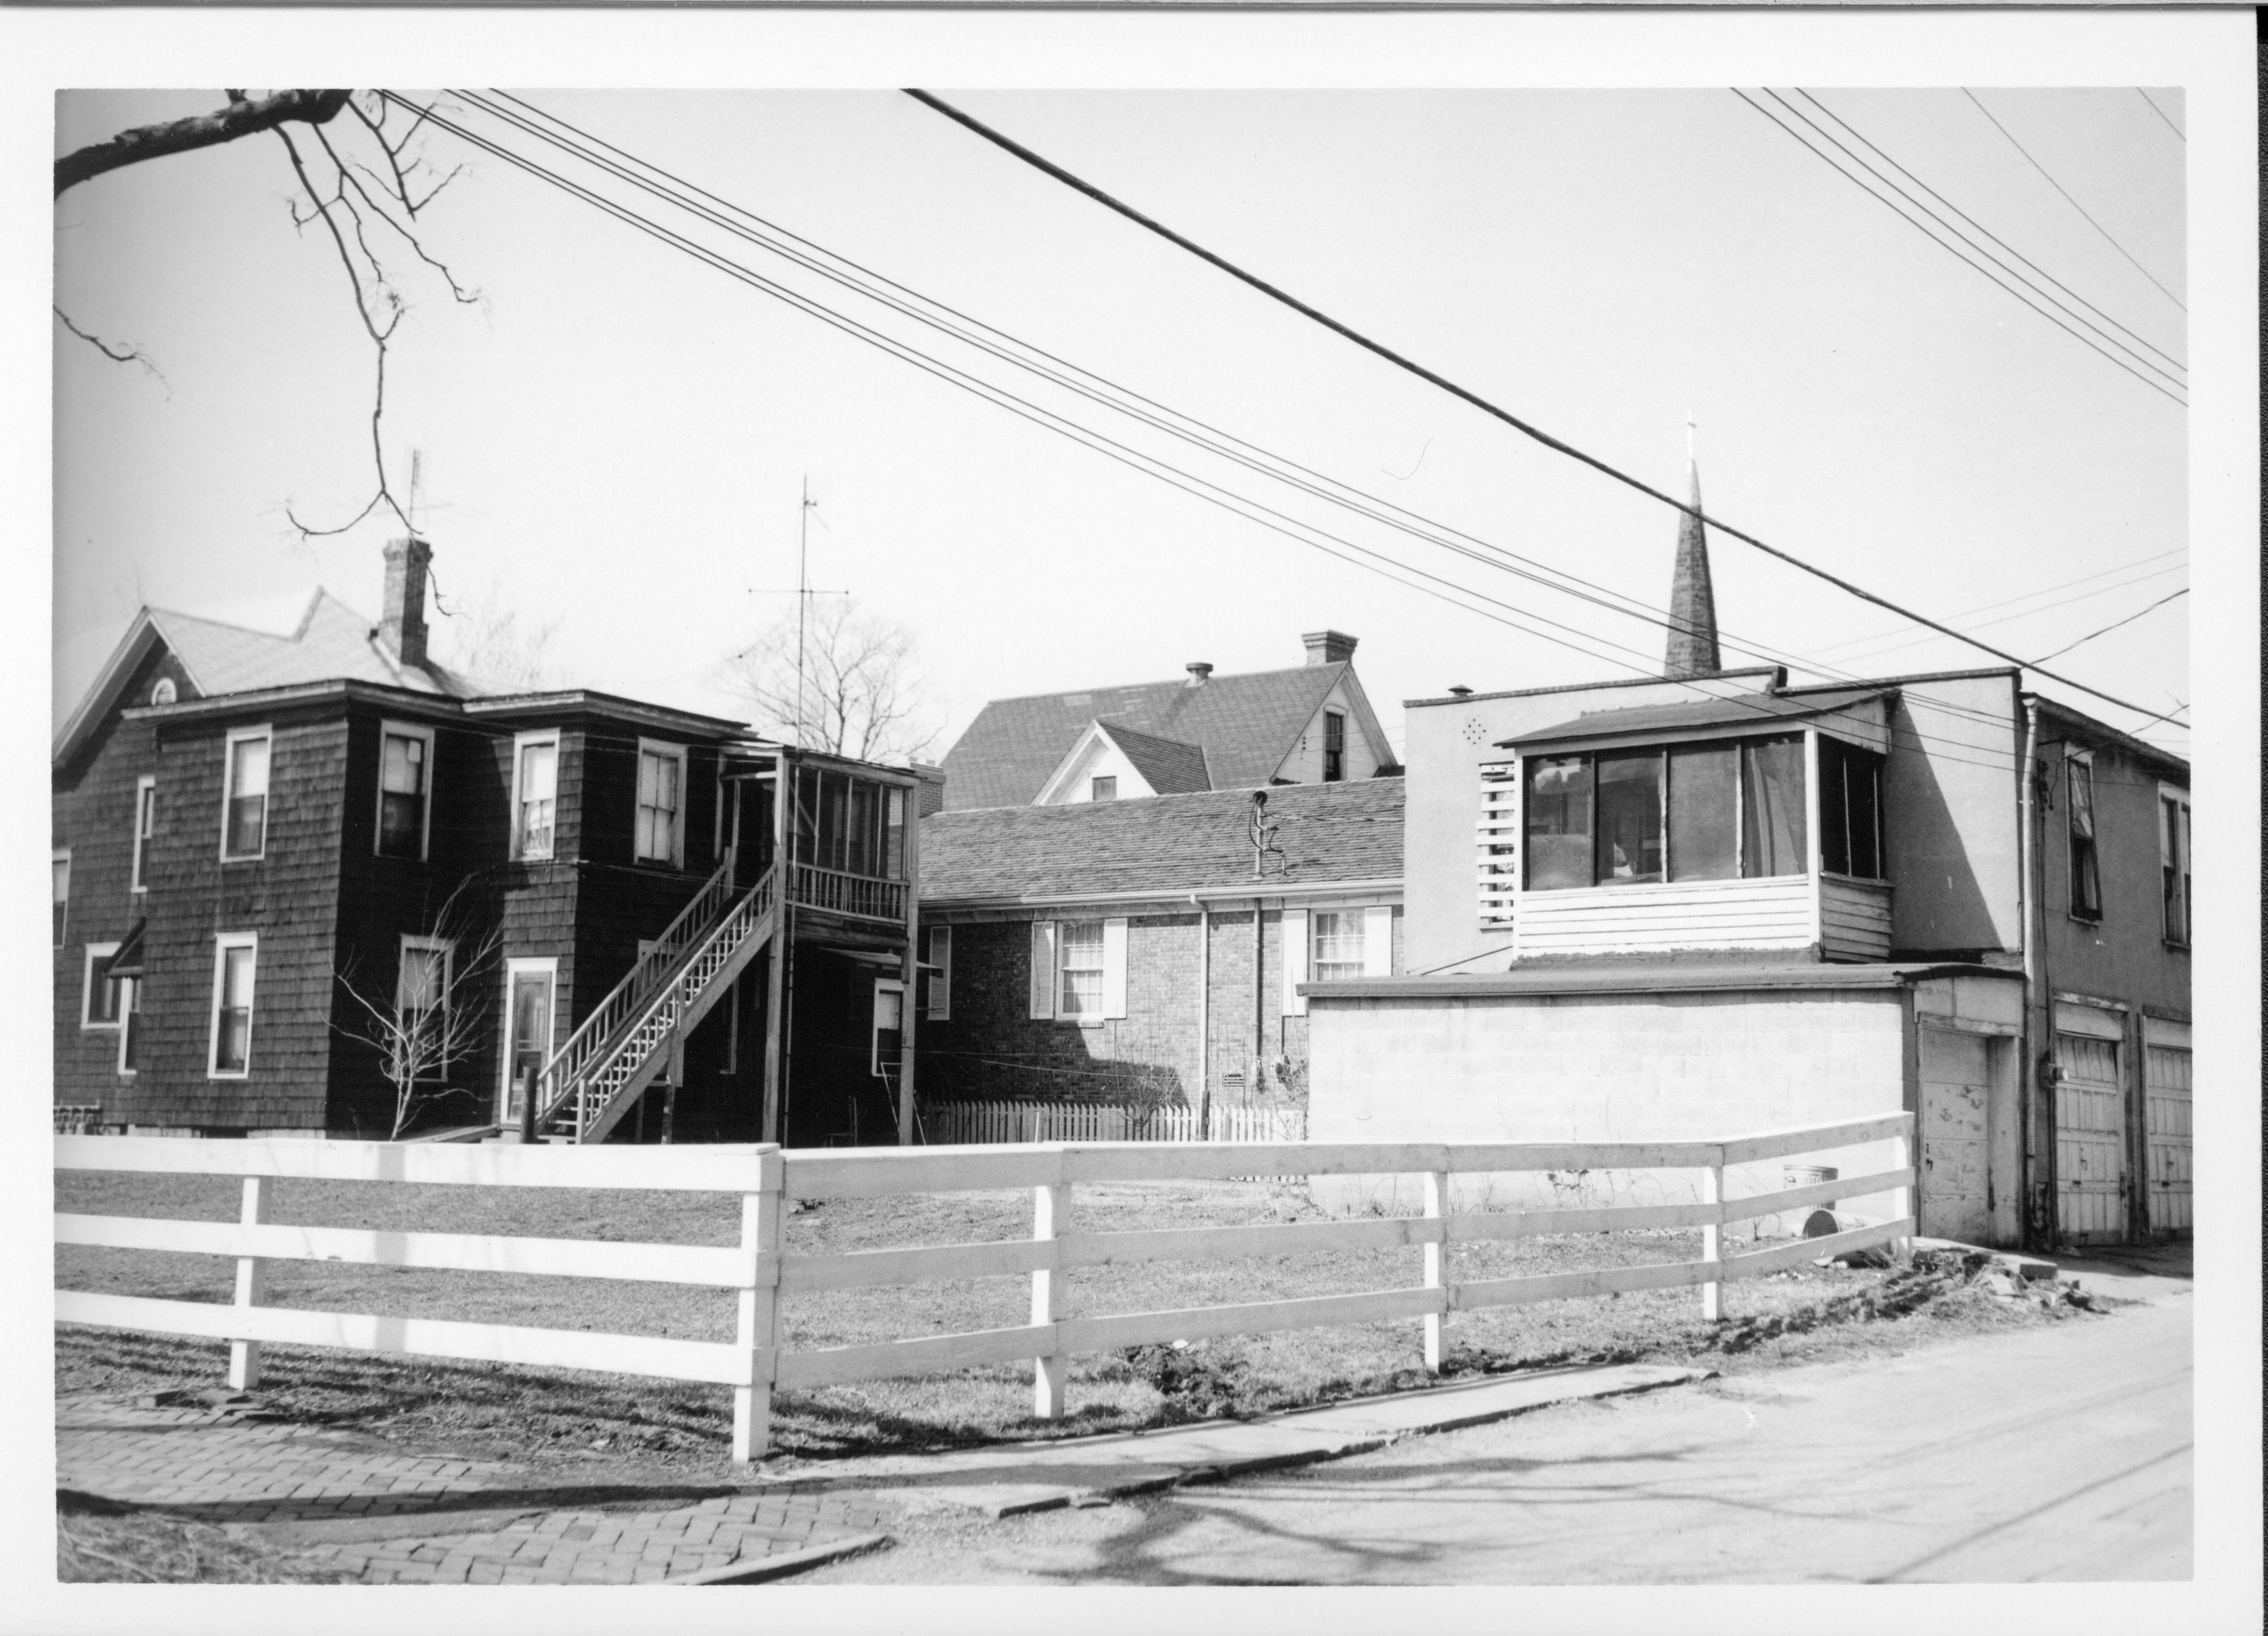 Dark shingled house and two-story garage on right belonging to Eleanor J. Pruett on Block 7, Lot 7 along 7th Street.  Brick building in center was used by Springfield Marine Bank.  Gabled house in background belonged to Eugene McNally. Located where Visitor Center is now. Looking Northwest from alley Pruett, McNally, Springfield Marine Bank, Visitor Center